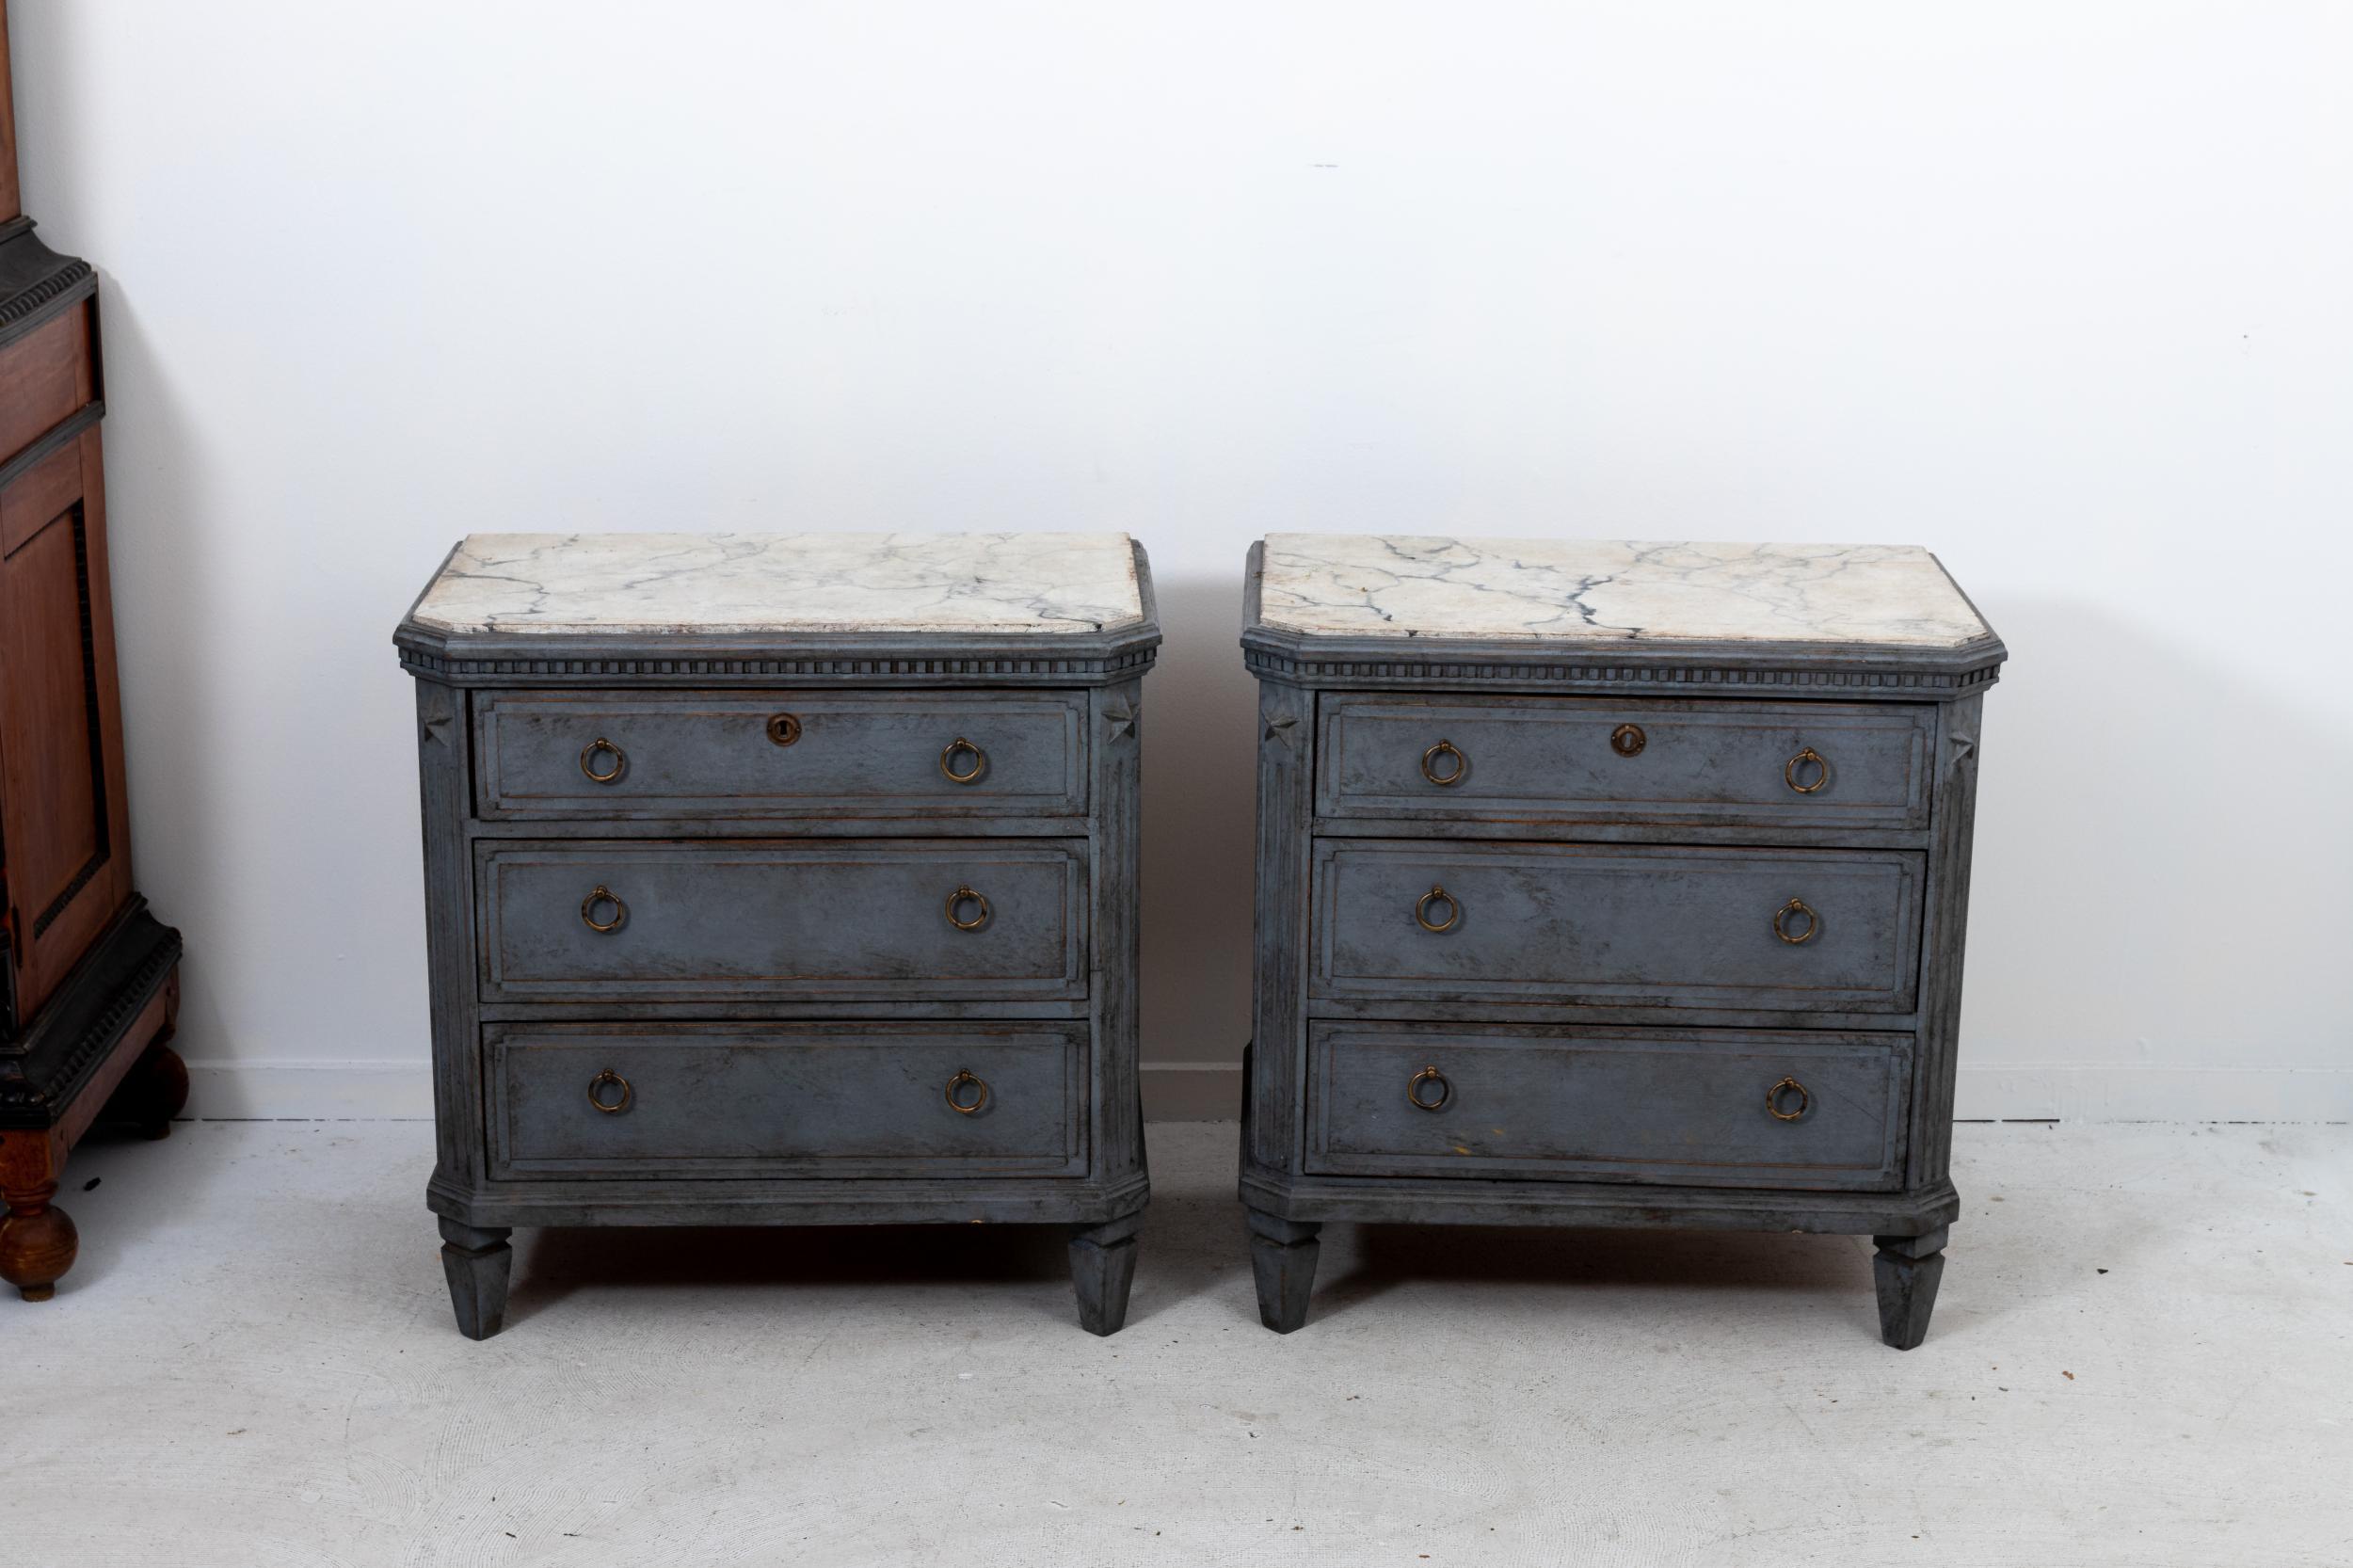 A pair of Gustavian style chests of drawers. A deep gray paint complements the decorative faux marble top. The canted corners are typically of the Gustavian style. Dentil molding, brass hardware, and star medallions complete the look.